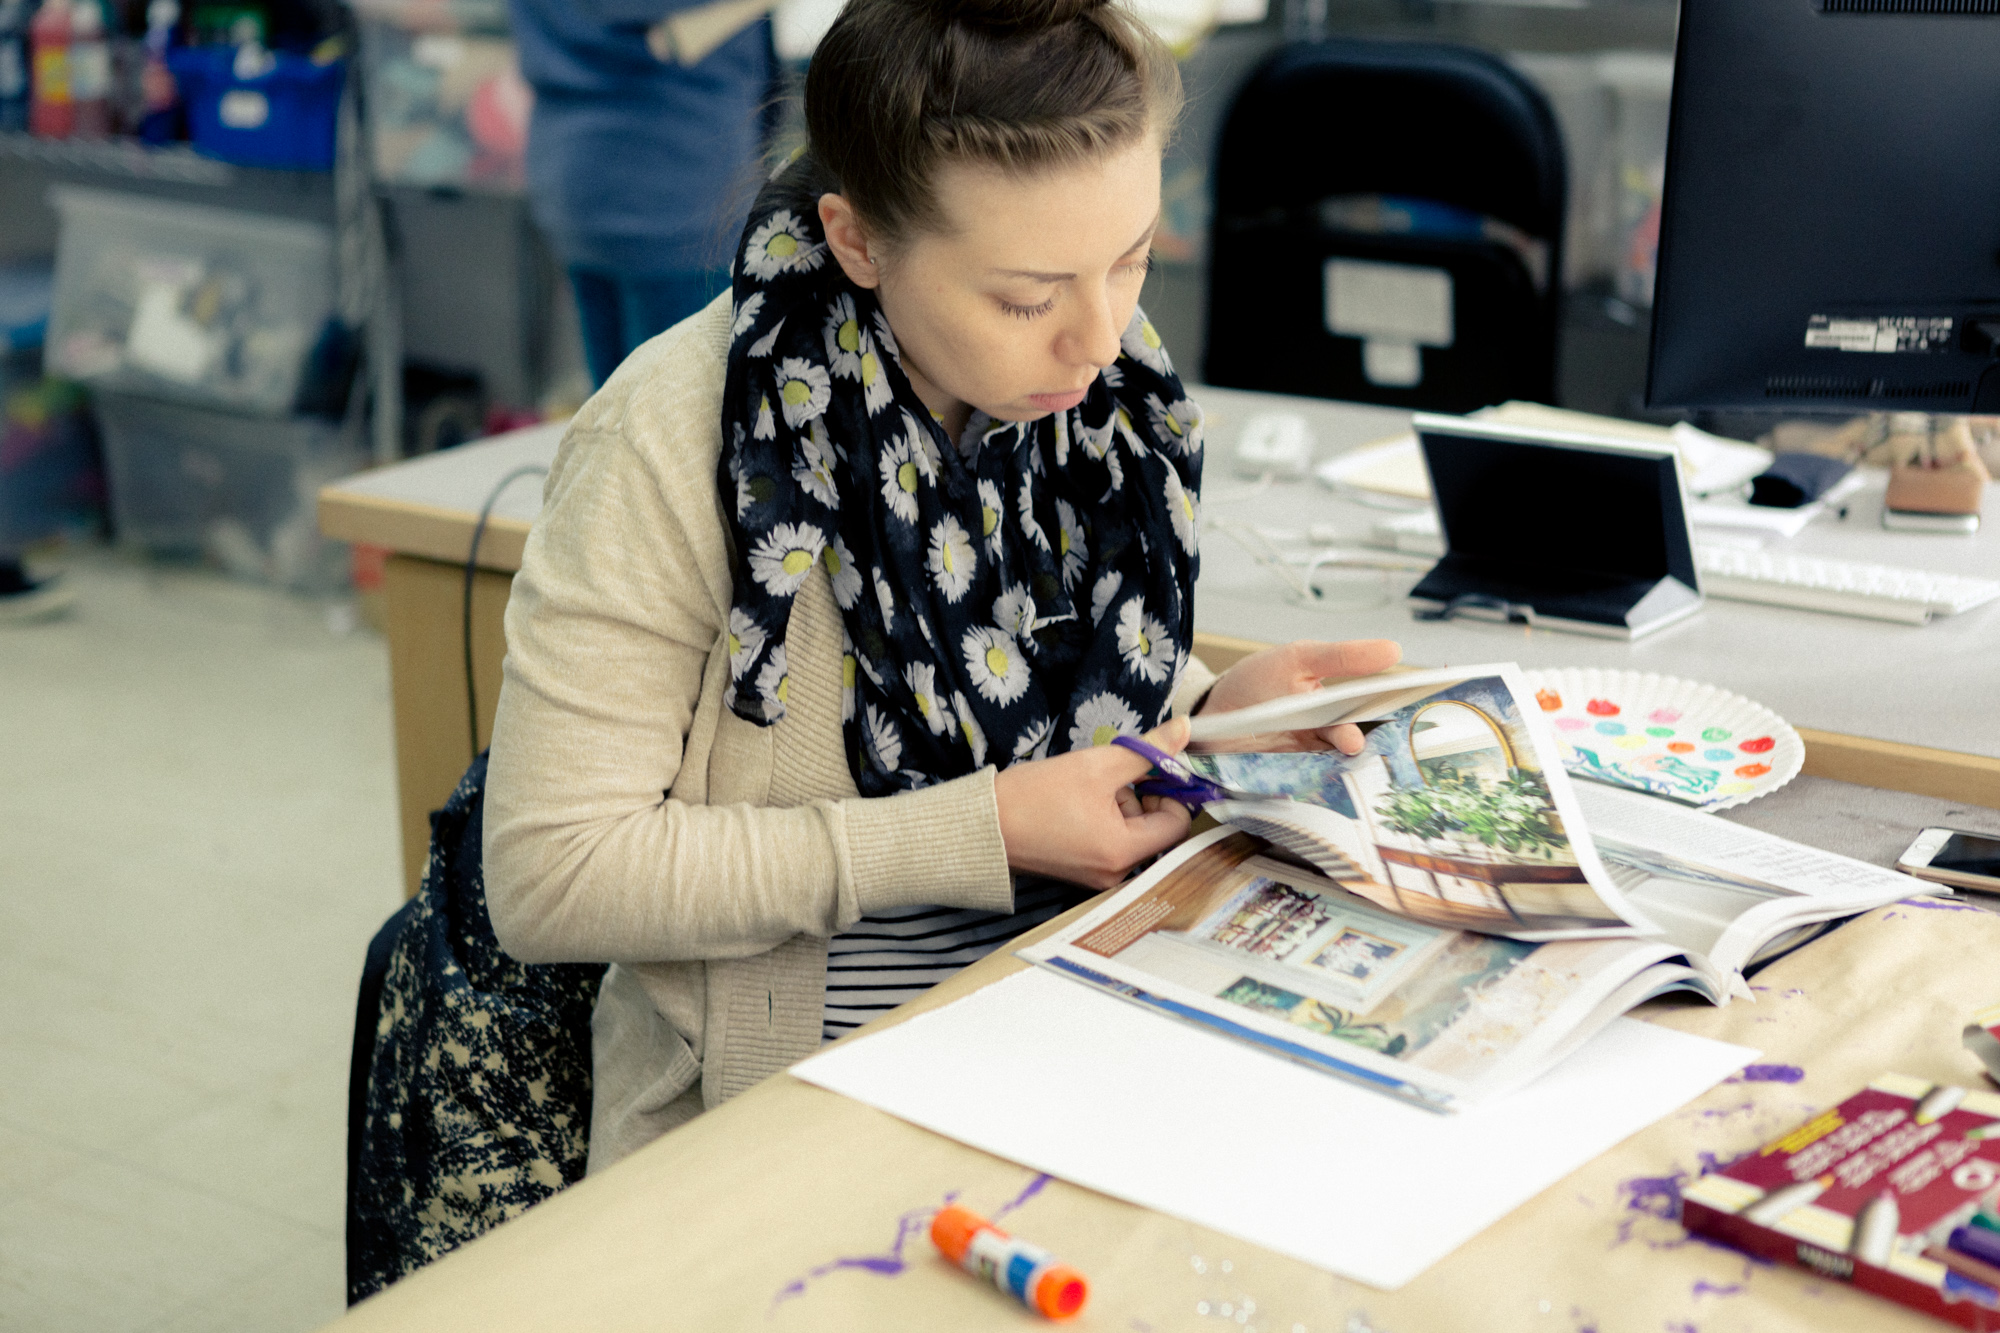 A woman with a scarf covered in sunflowers cuts an image out of a magazine while sitting at a desk.